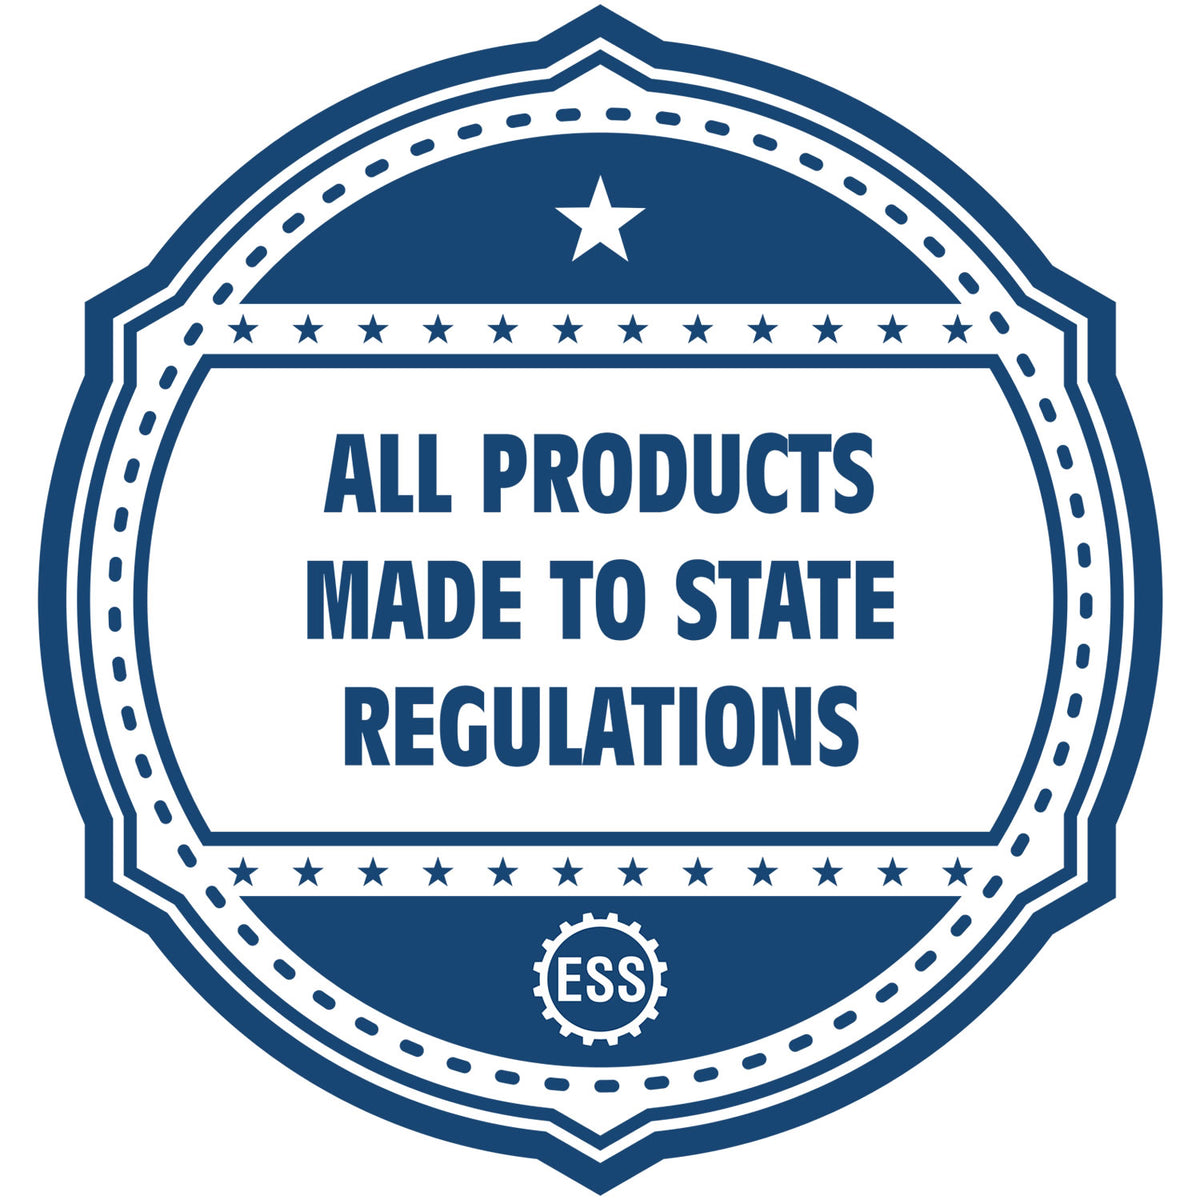 An icon or badge element for the State of Delaware Extended Long Reach Engineer Seal showing that this product is made in compliance with state regulations.